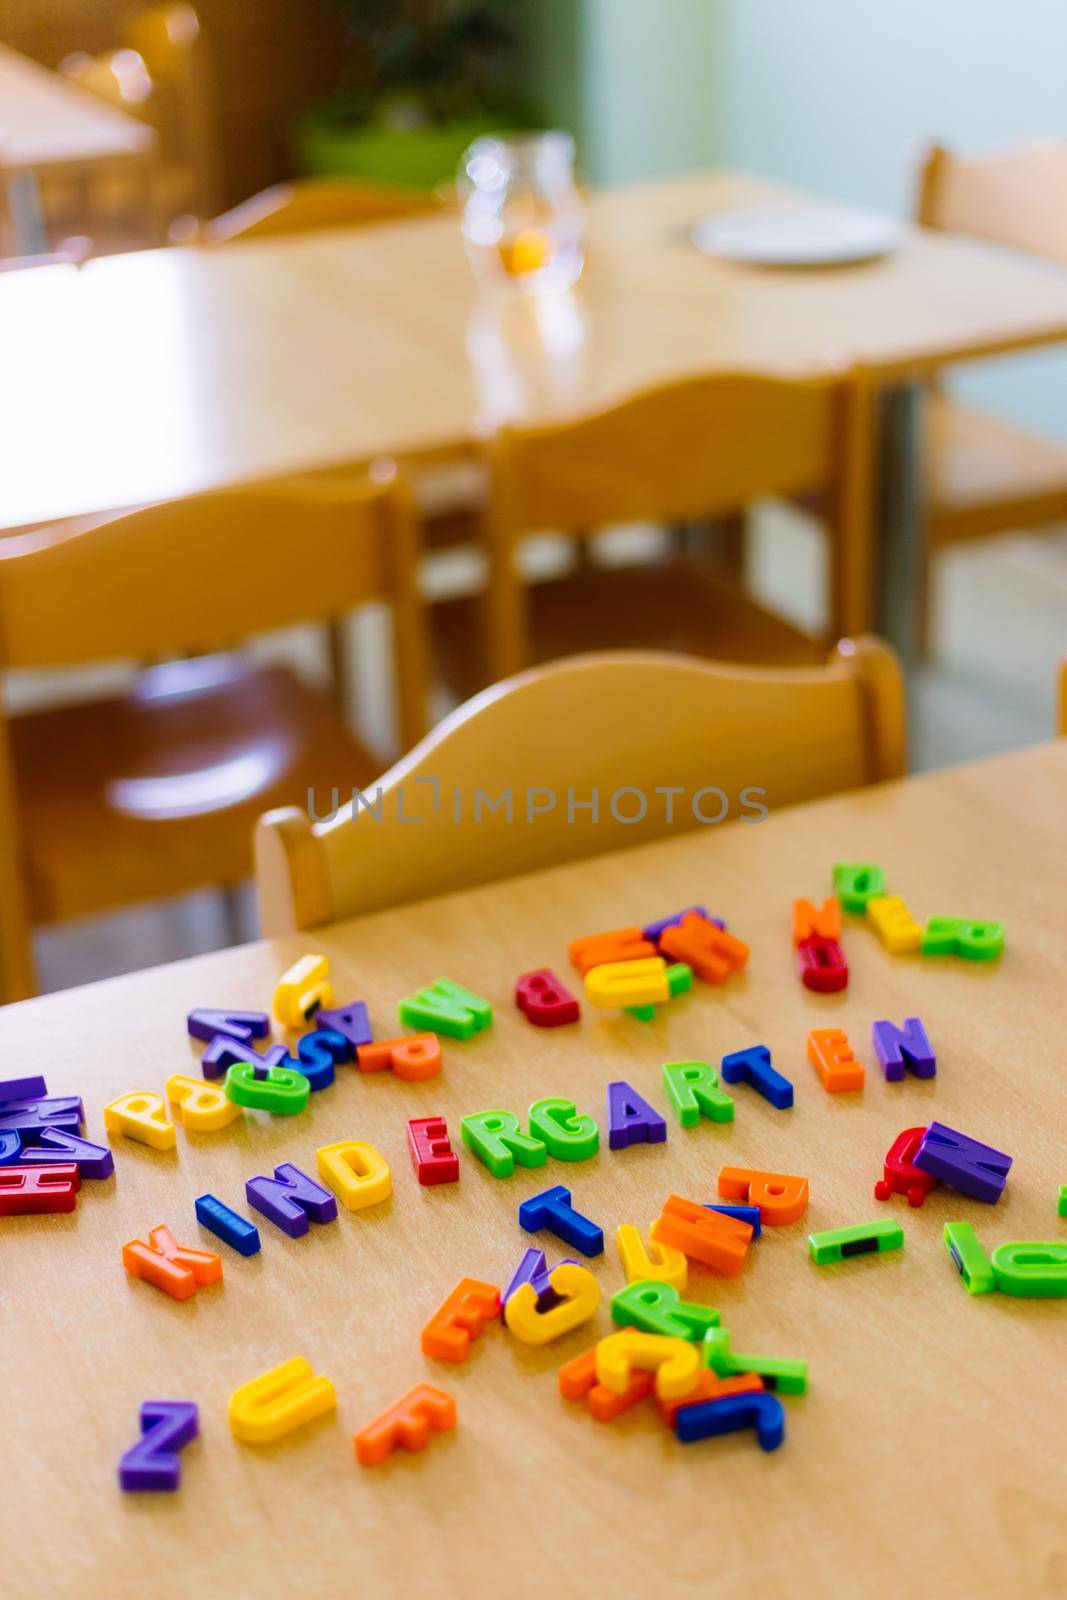 Colorful letters with the word “Kindergarten”